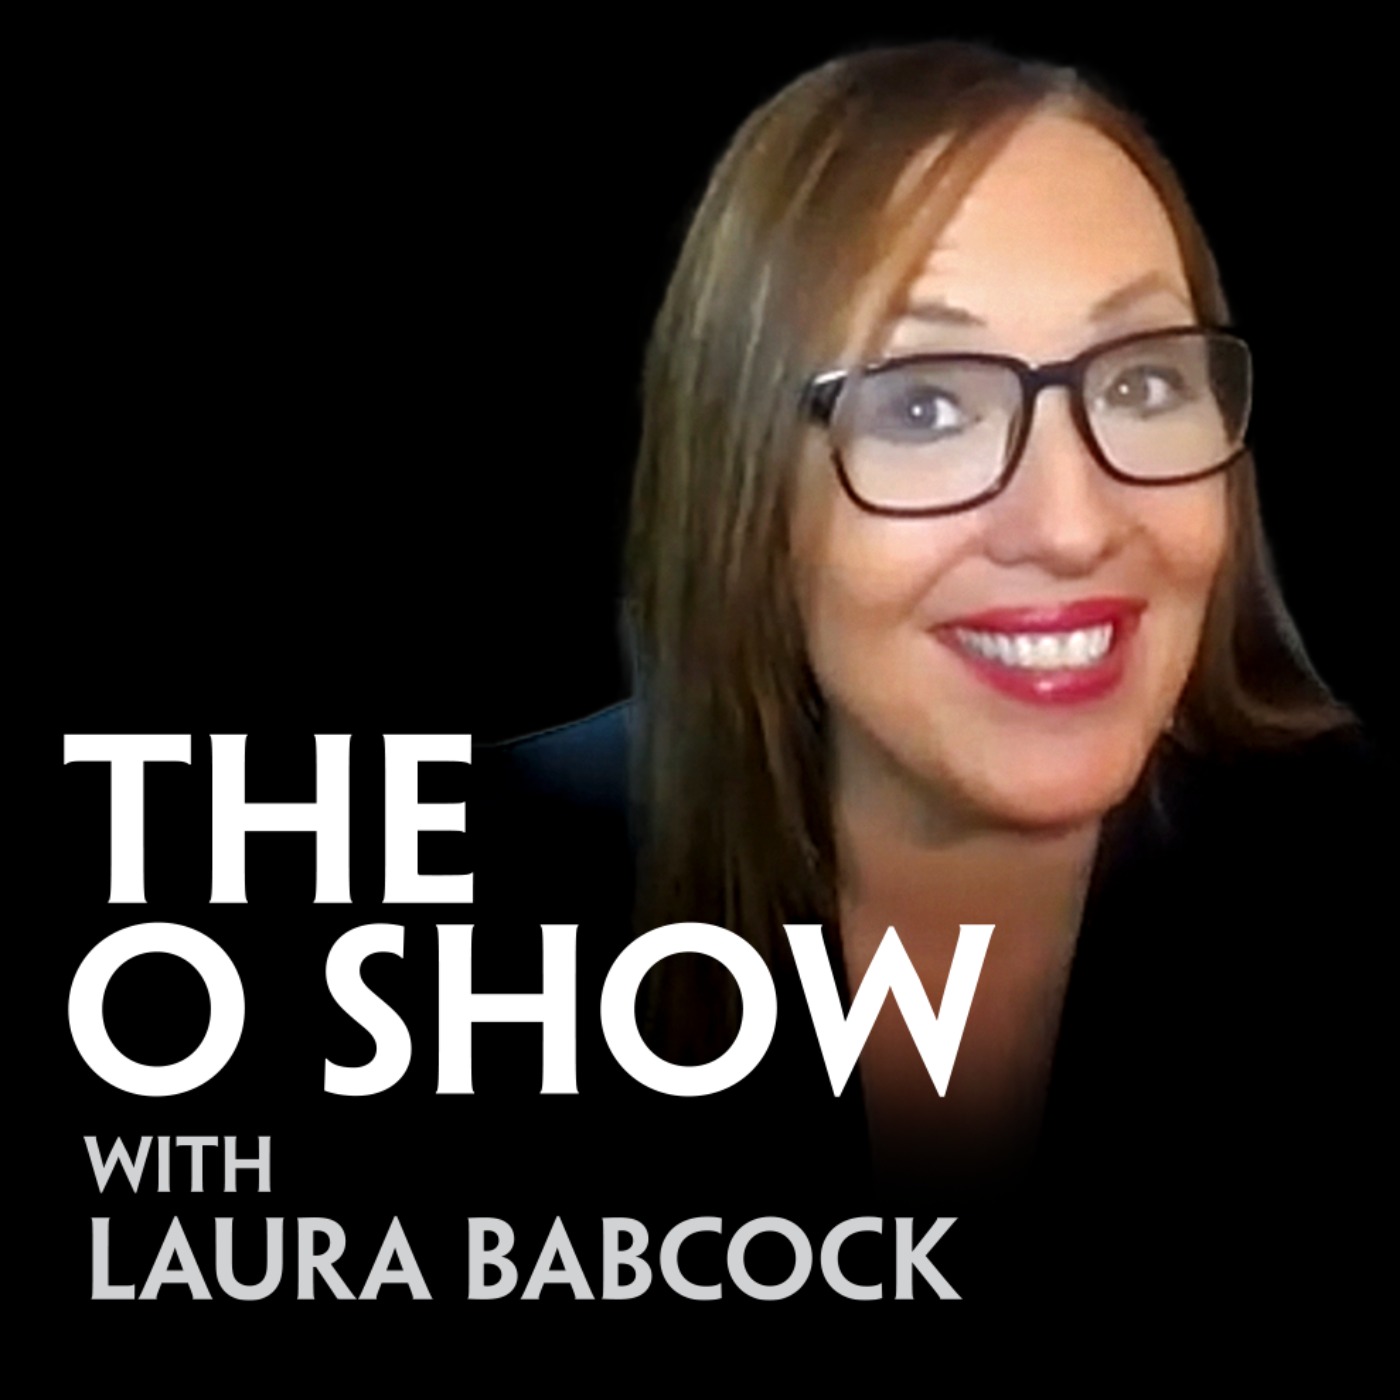 cover art for THE OSHOW WITH LAURA BABCOCK FORD'S CATASTROPHIC PLAN FOR THE ENVIRONMENT